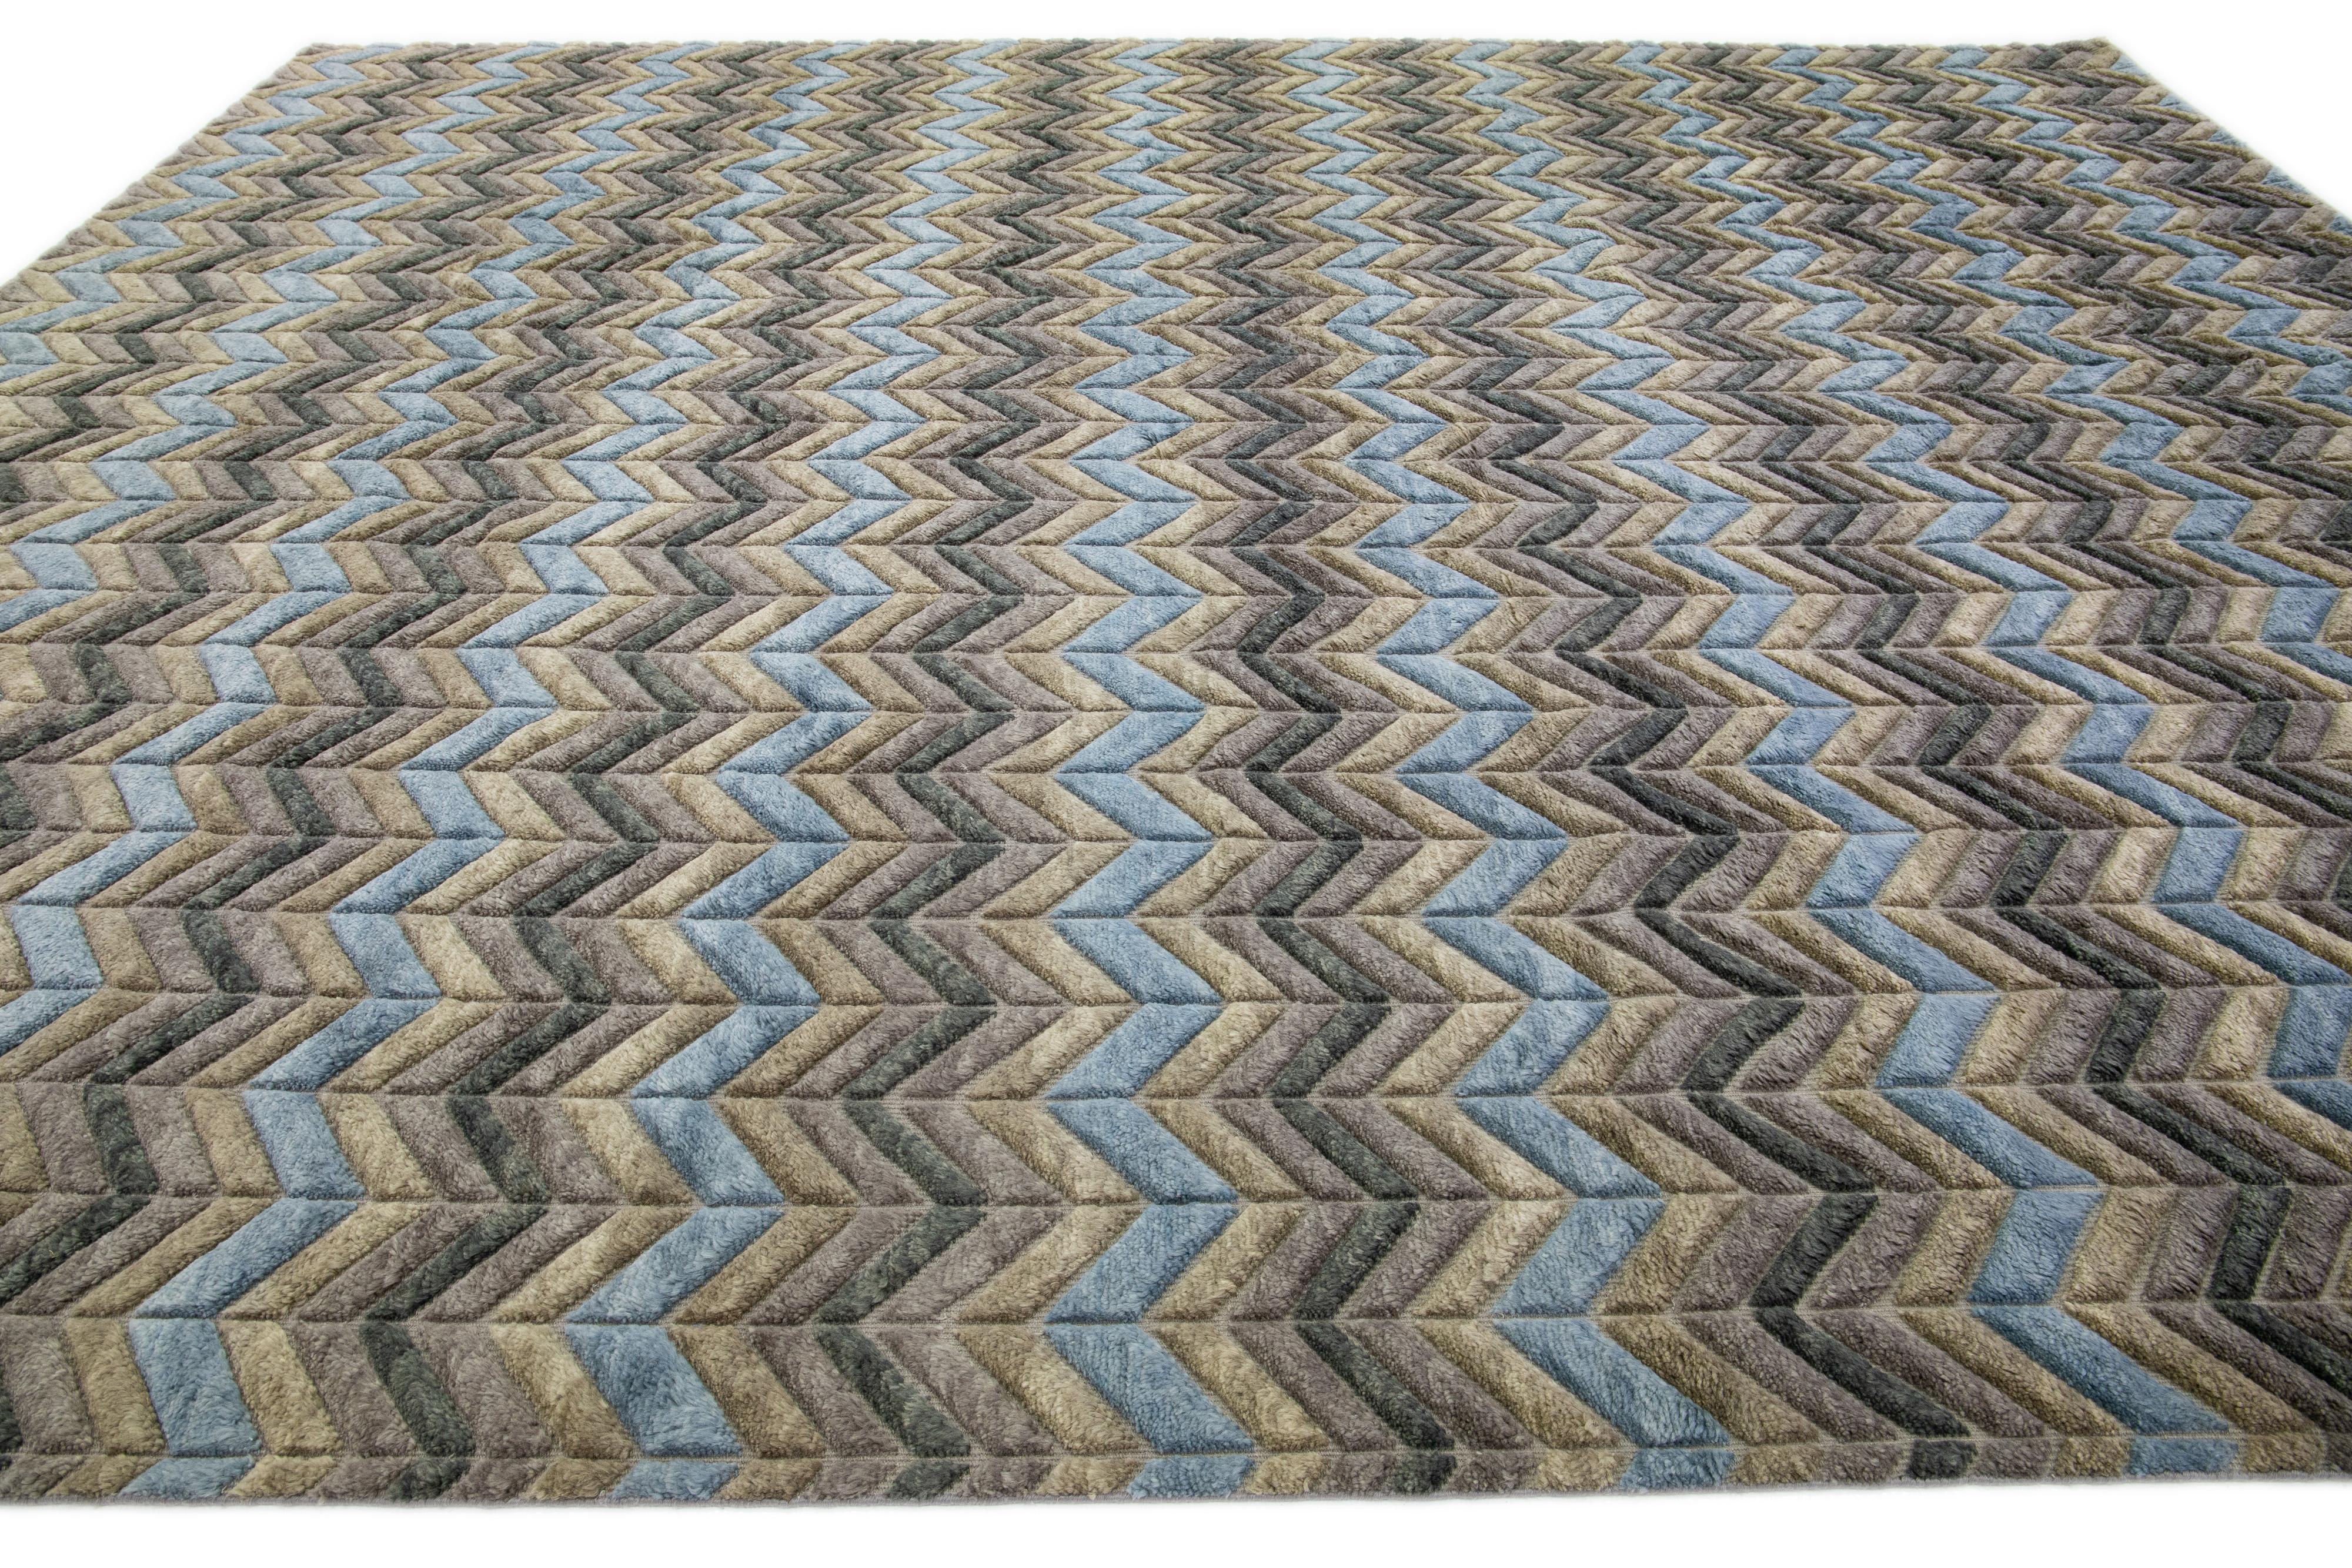 Pakistani Contemporary Moroccan Style Wool Rug With Geometric Motif In Earthy Shades For Sale